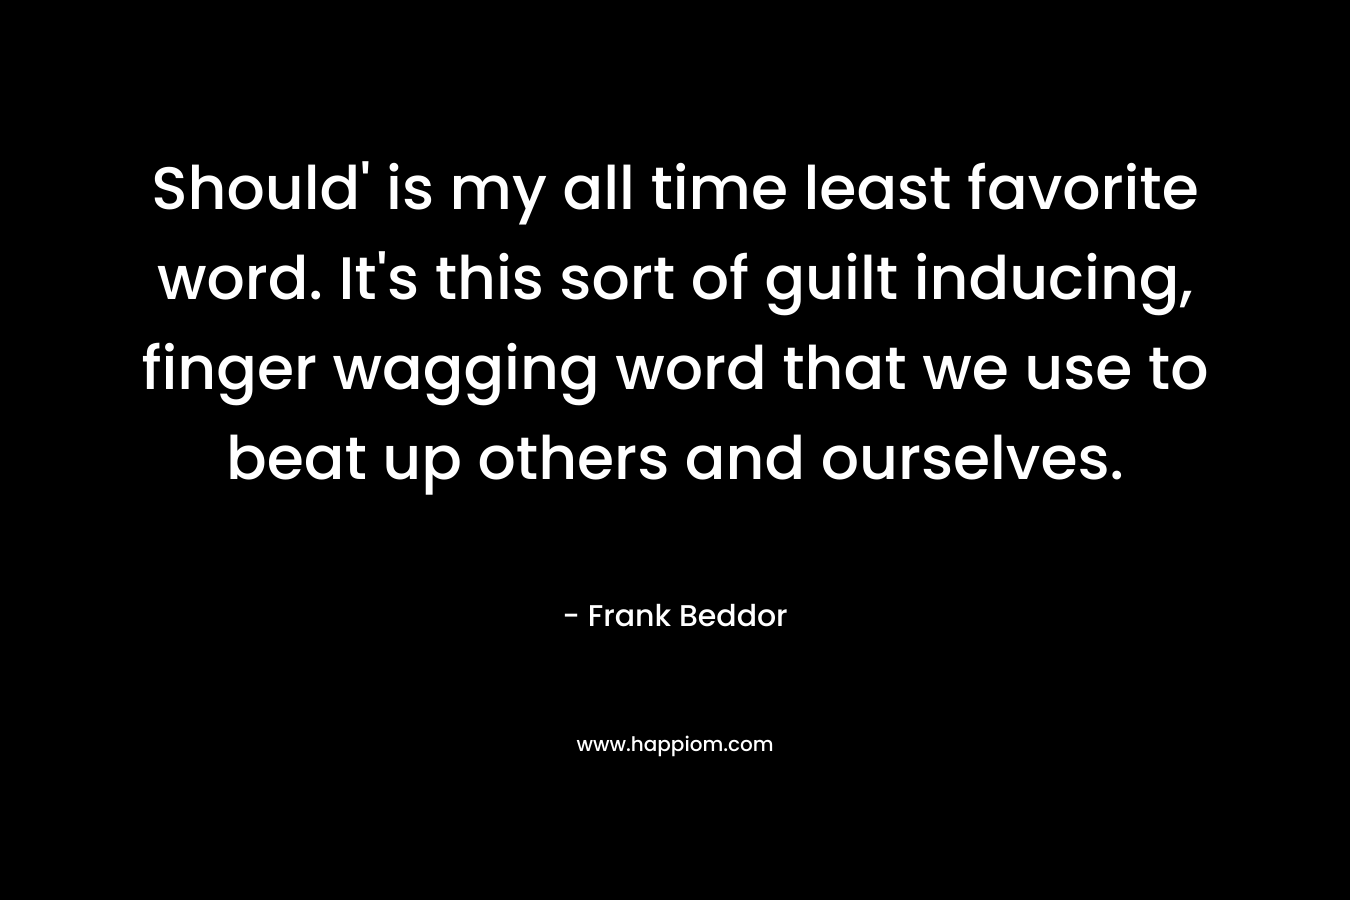 Should’ is my all time least favorite word. It’s this sort of guilt inducing, finger wagging word that we use to beat up others and ourselves. – Frank Beddor